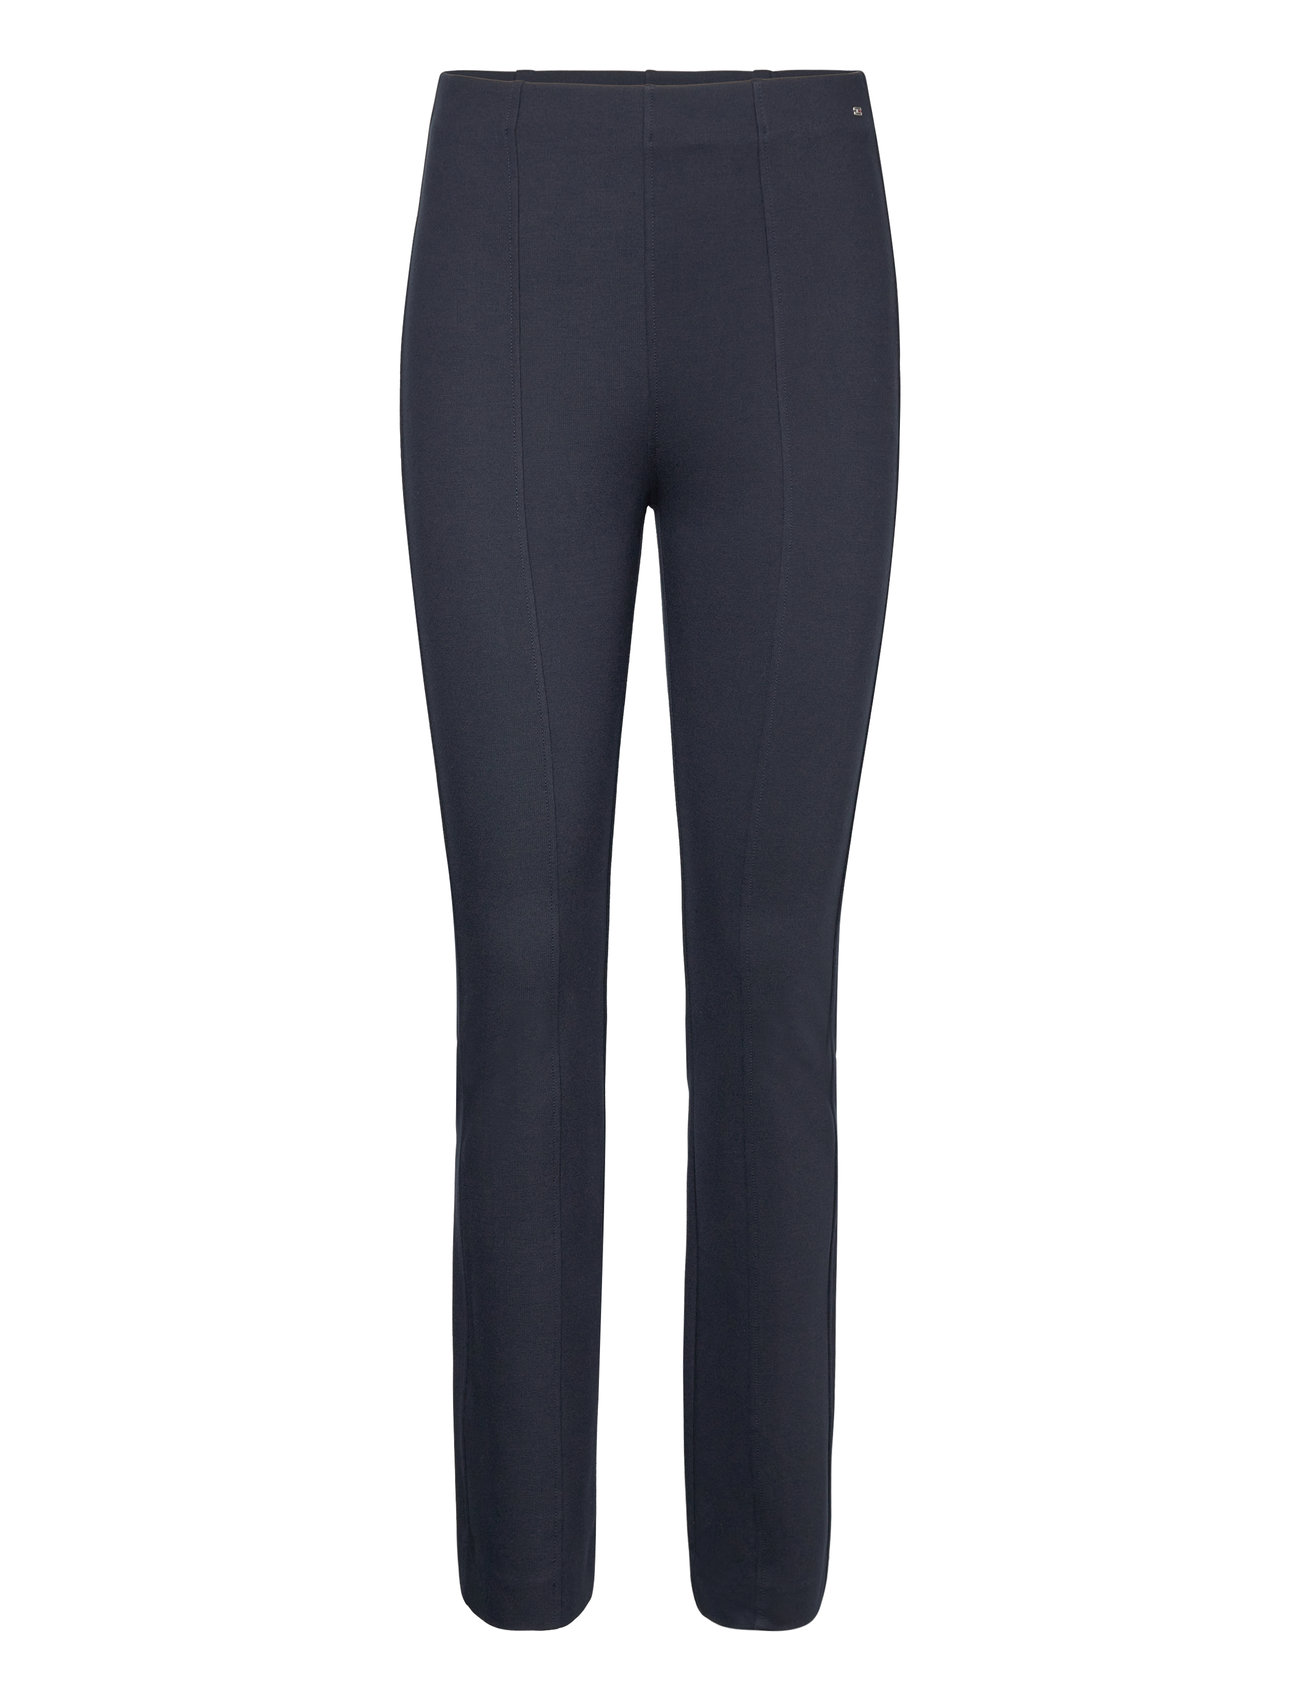 Elevated Slim Knitted Pant Bottoms Trousers Slim Fit Trousers Navy Tommy Hilfiger